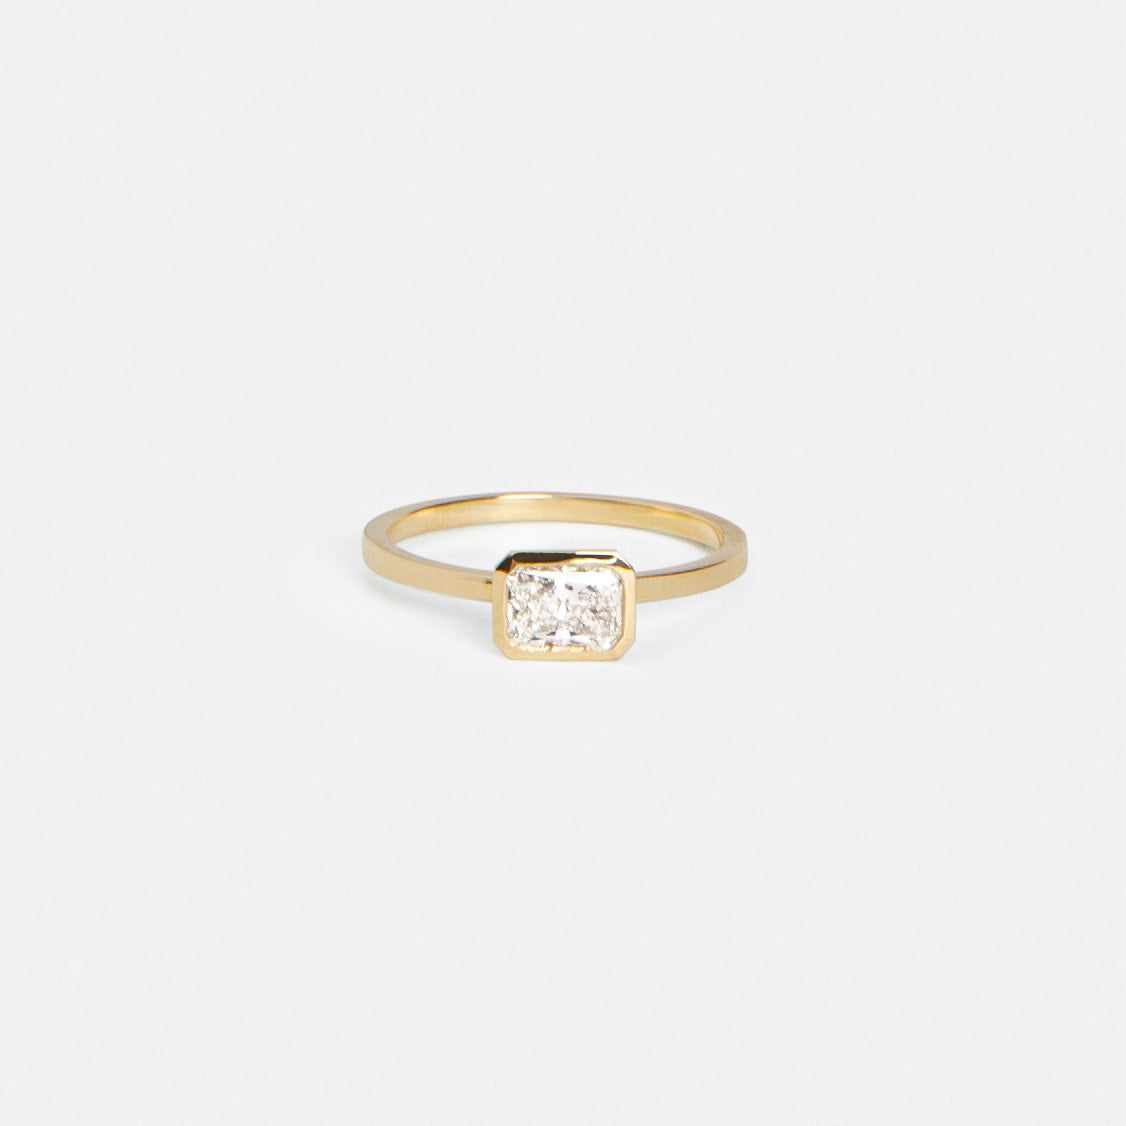 Mudu Designer Ring in 14k Gold set with a 0.6ct radiant cut lab-grown diamond By SHW Fine Jewelry NYC